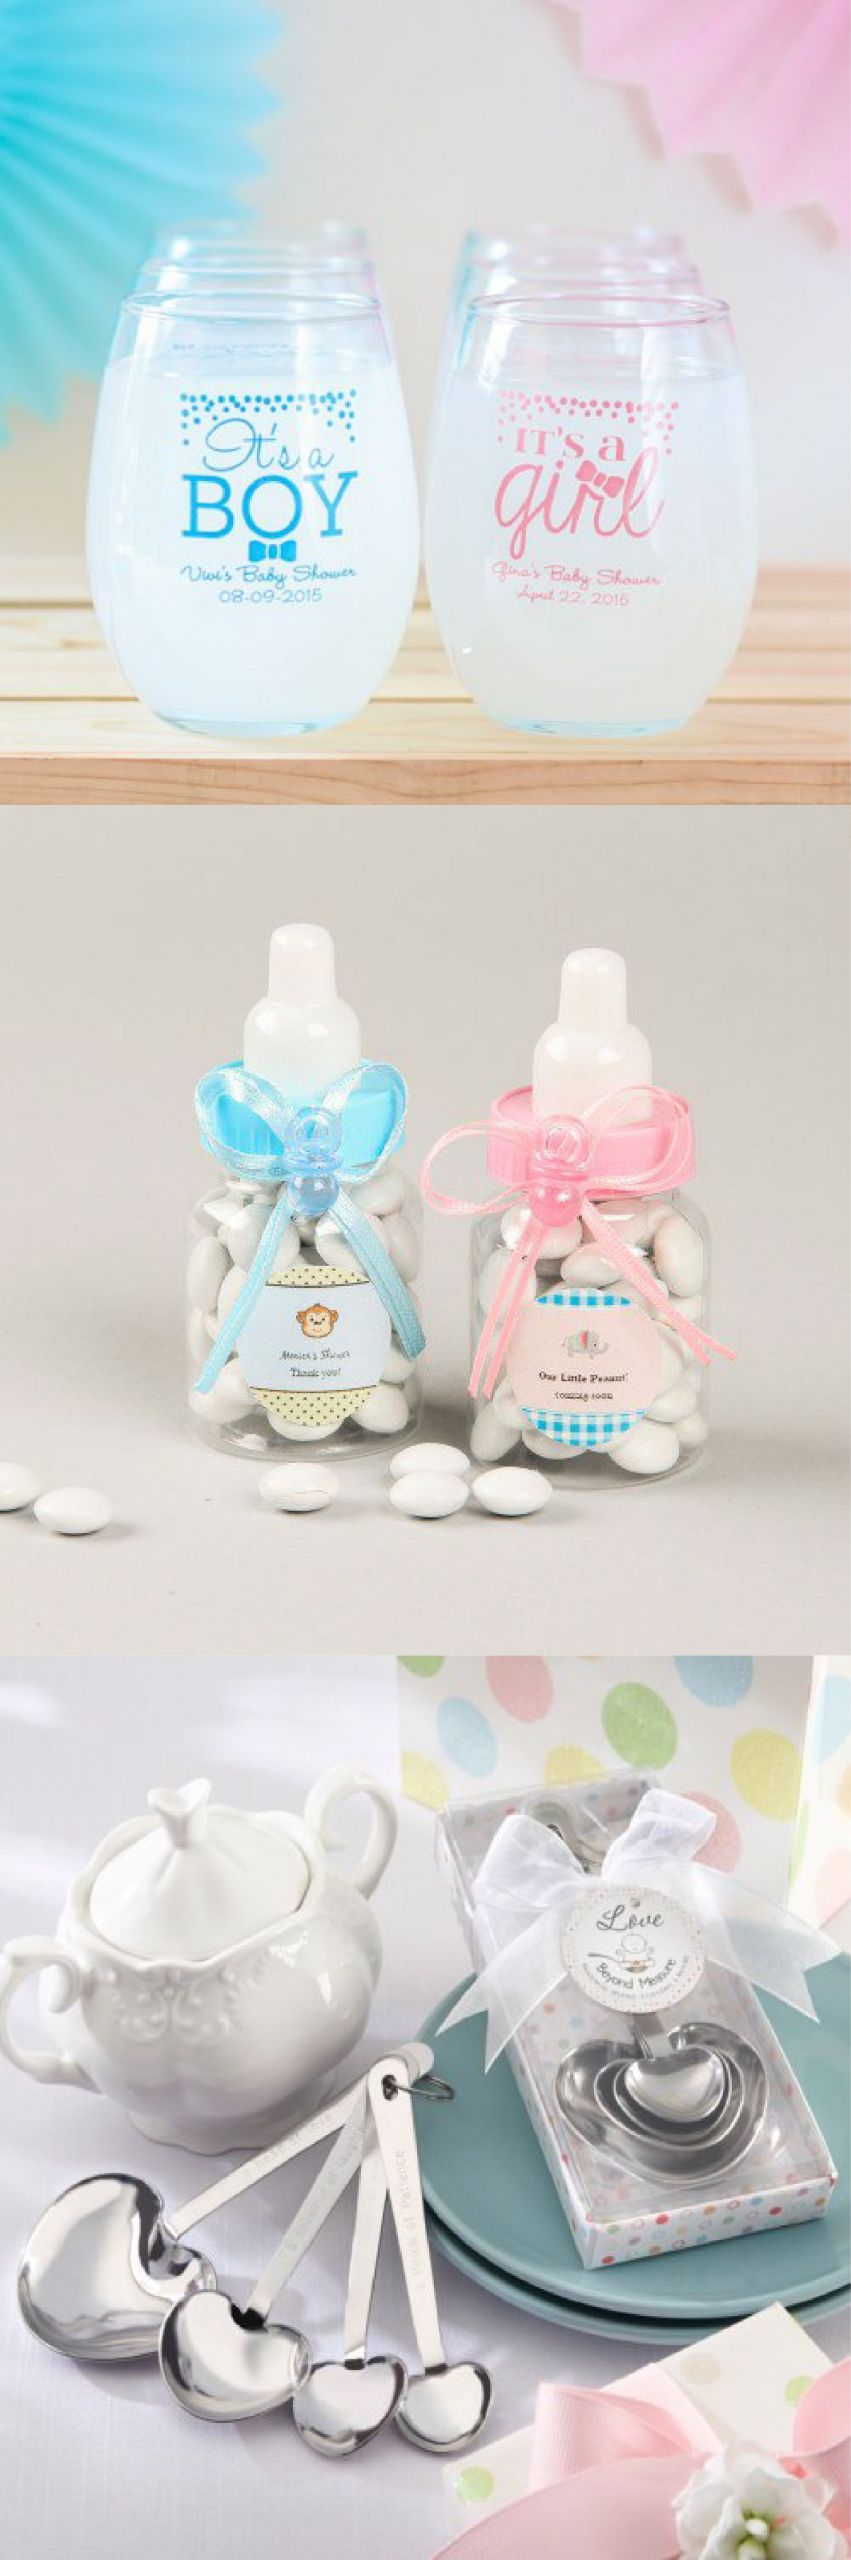 Party Favors For Baby Shower Guests
 Thank your guests with the perfect baby shower favors